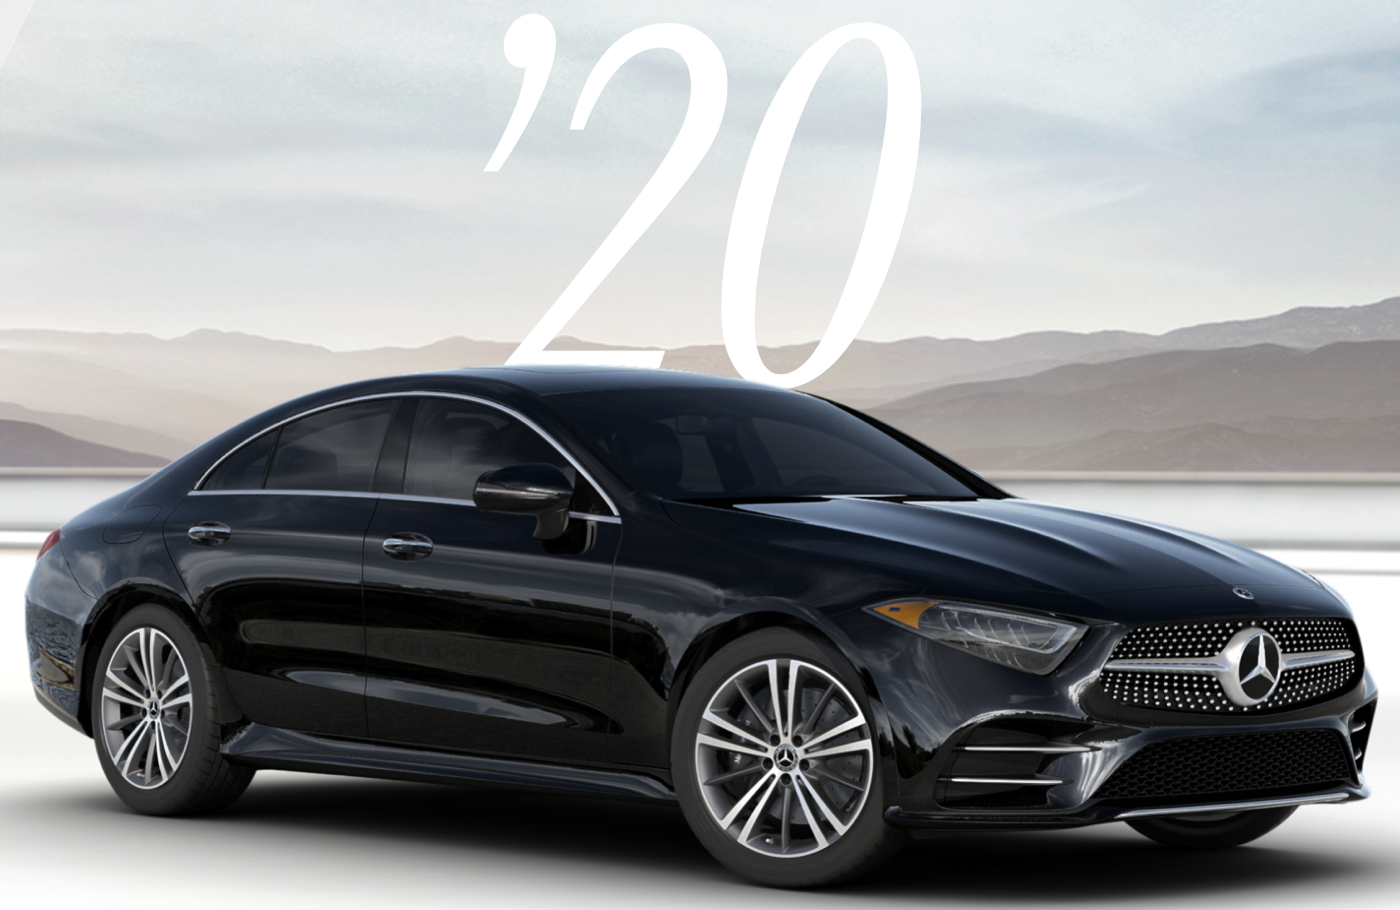 http://thecarchat.net/admin/carchat_admin/app/web/img/uploaded/2020 Mercedes CLS 450 via mbusau.com